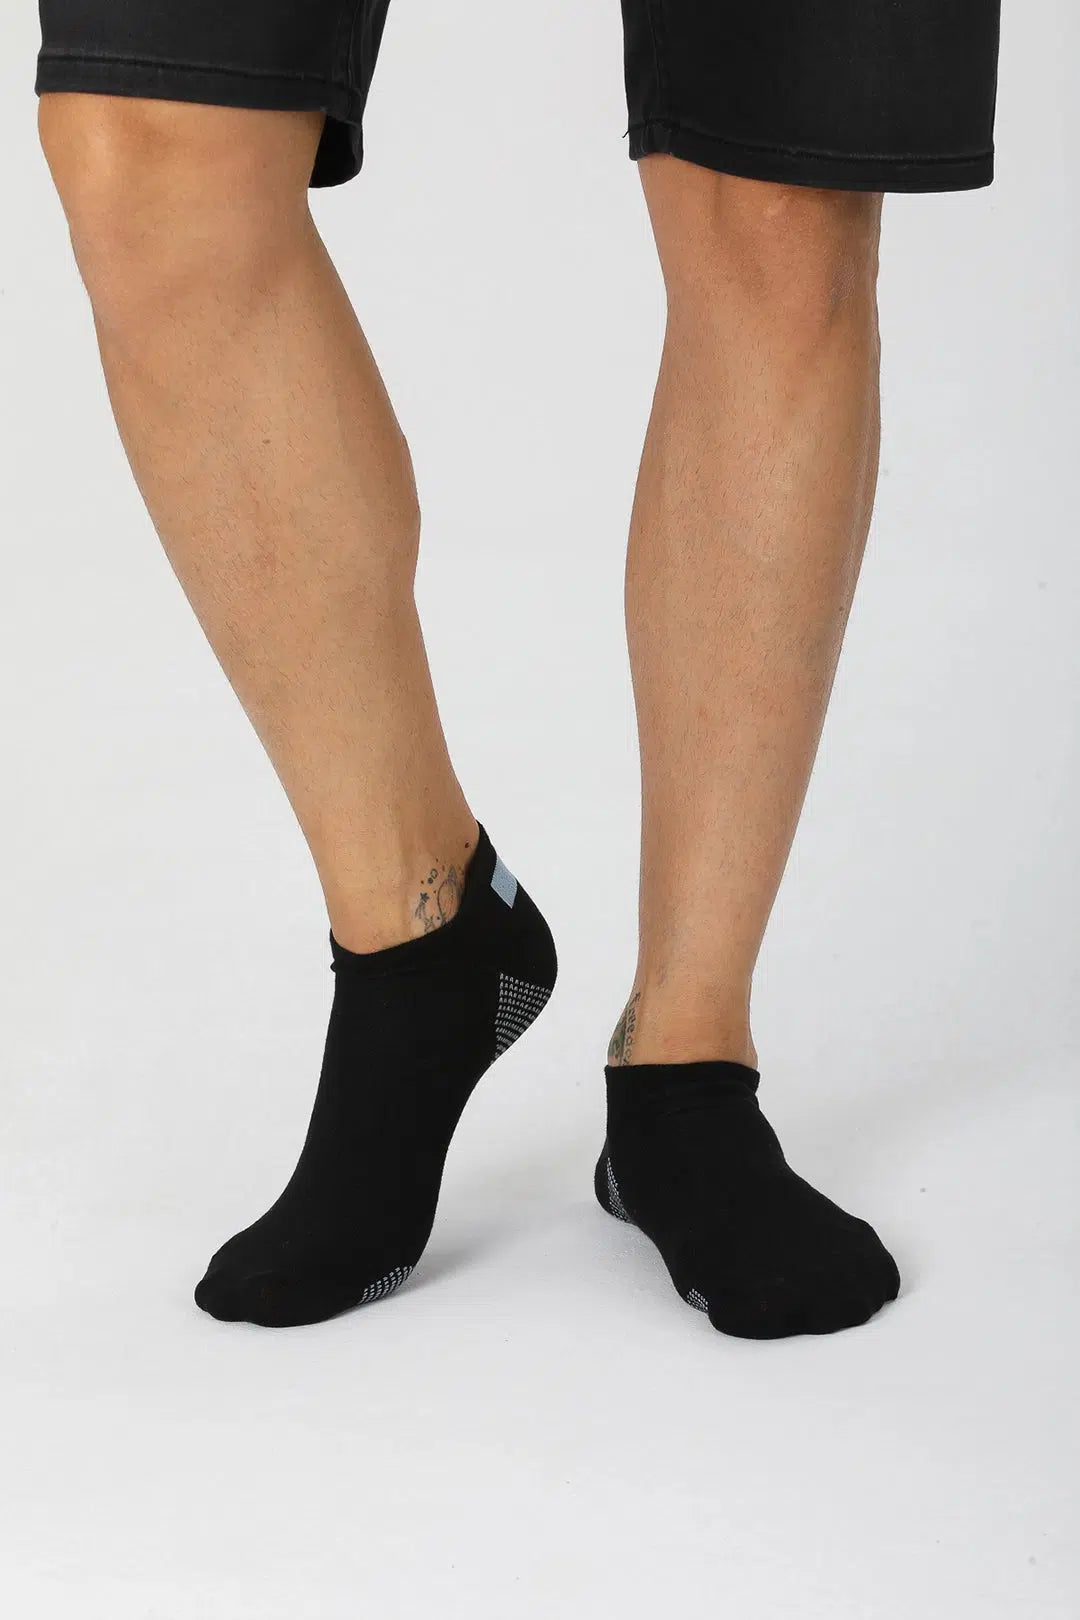 GoWith-men-cotton-sport-ankle-socks